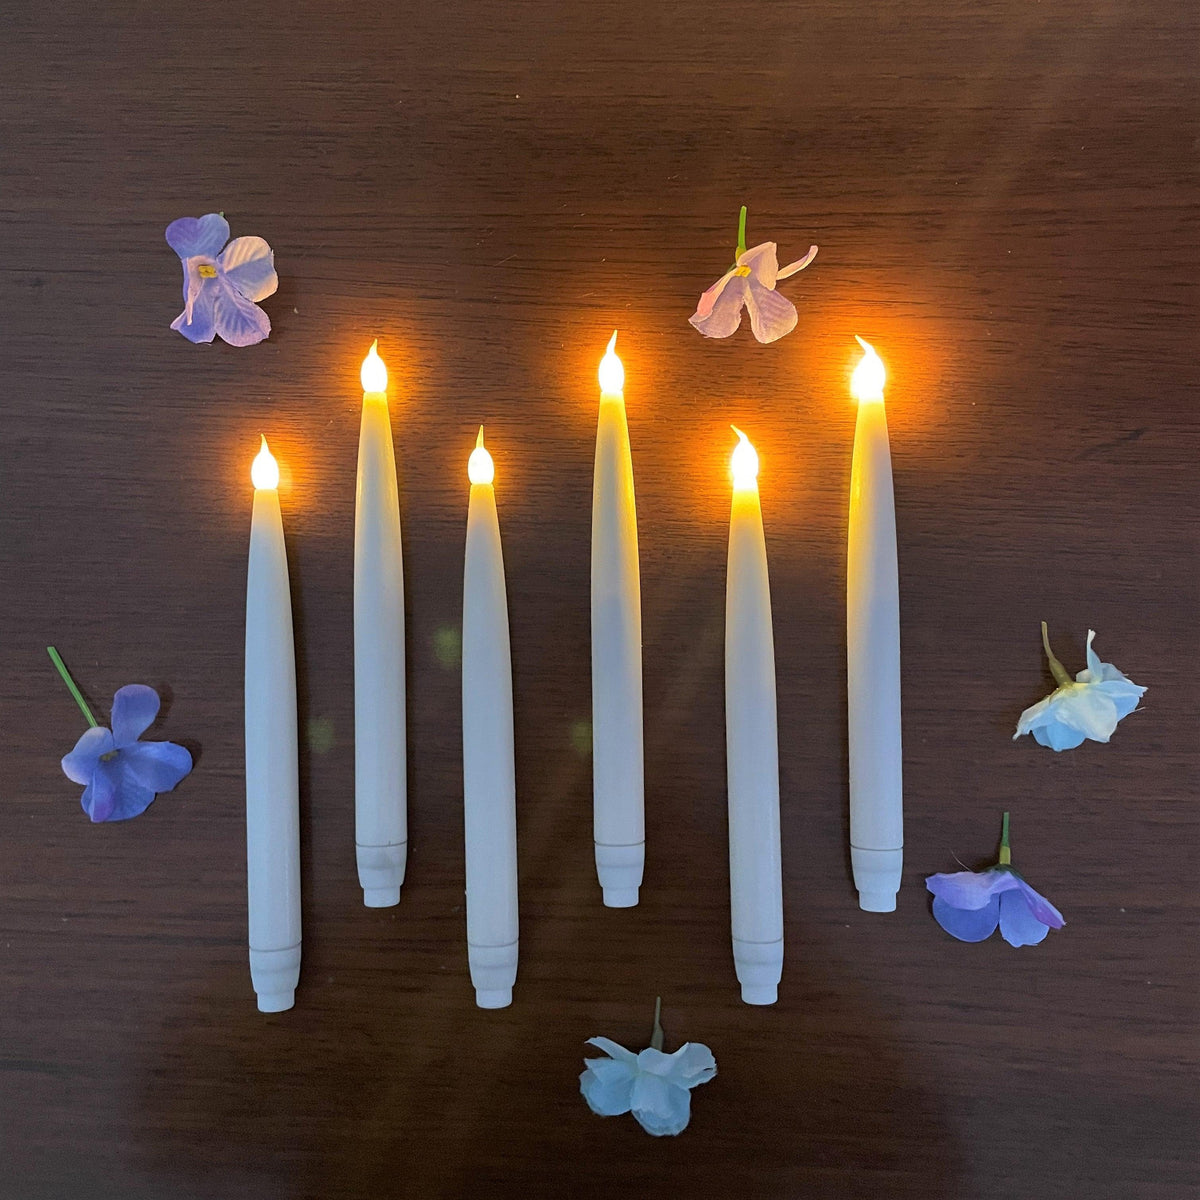 LED Dinner Taper Candles (Set of 10) - Floral Art by Nandini (A unit of R S creations and designs)